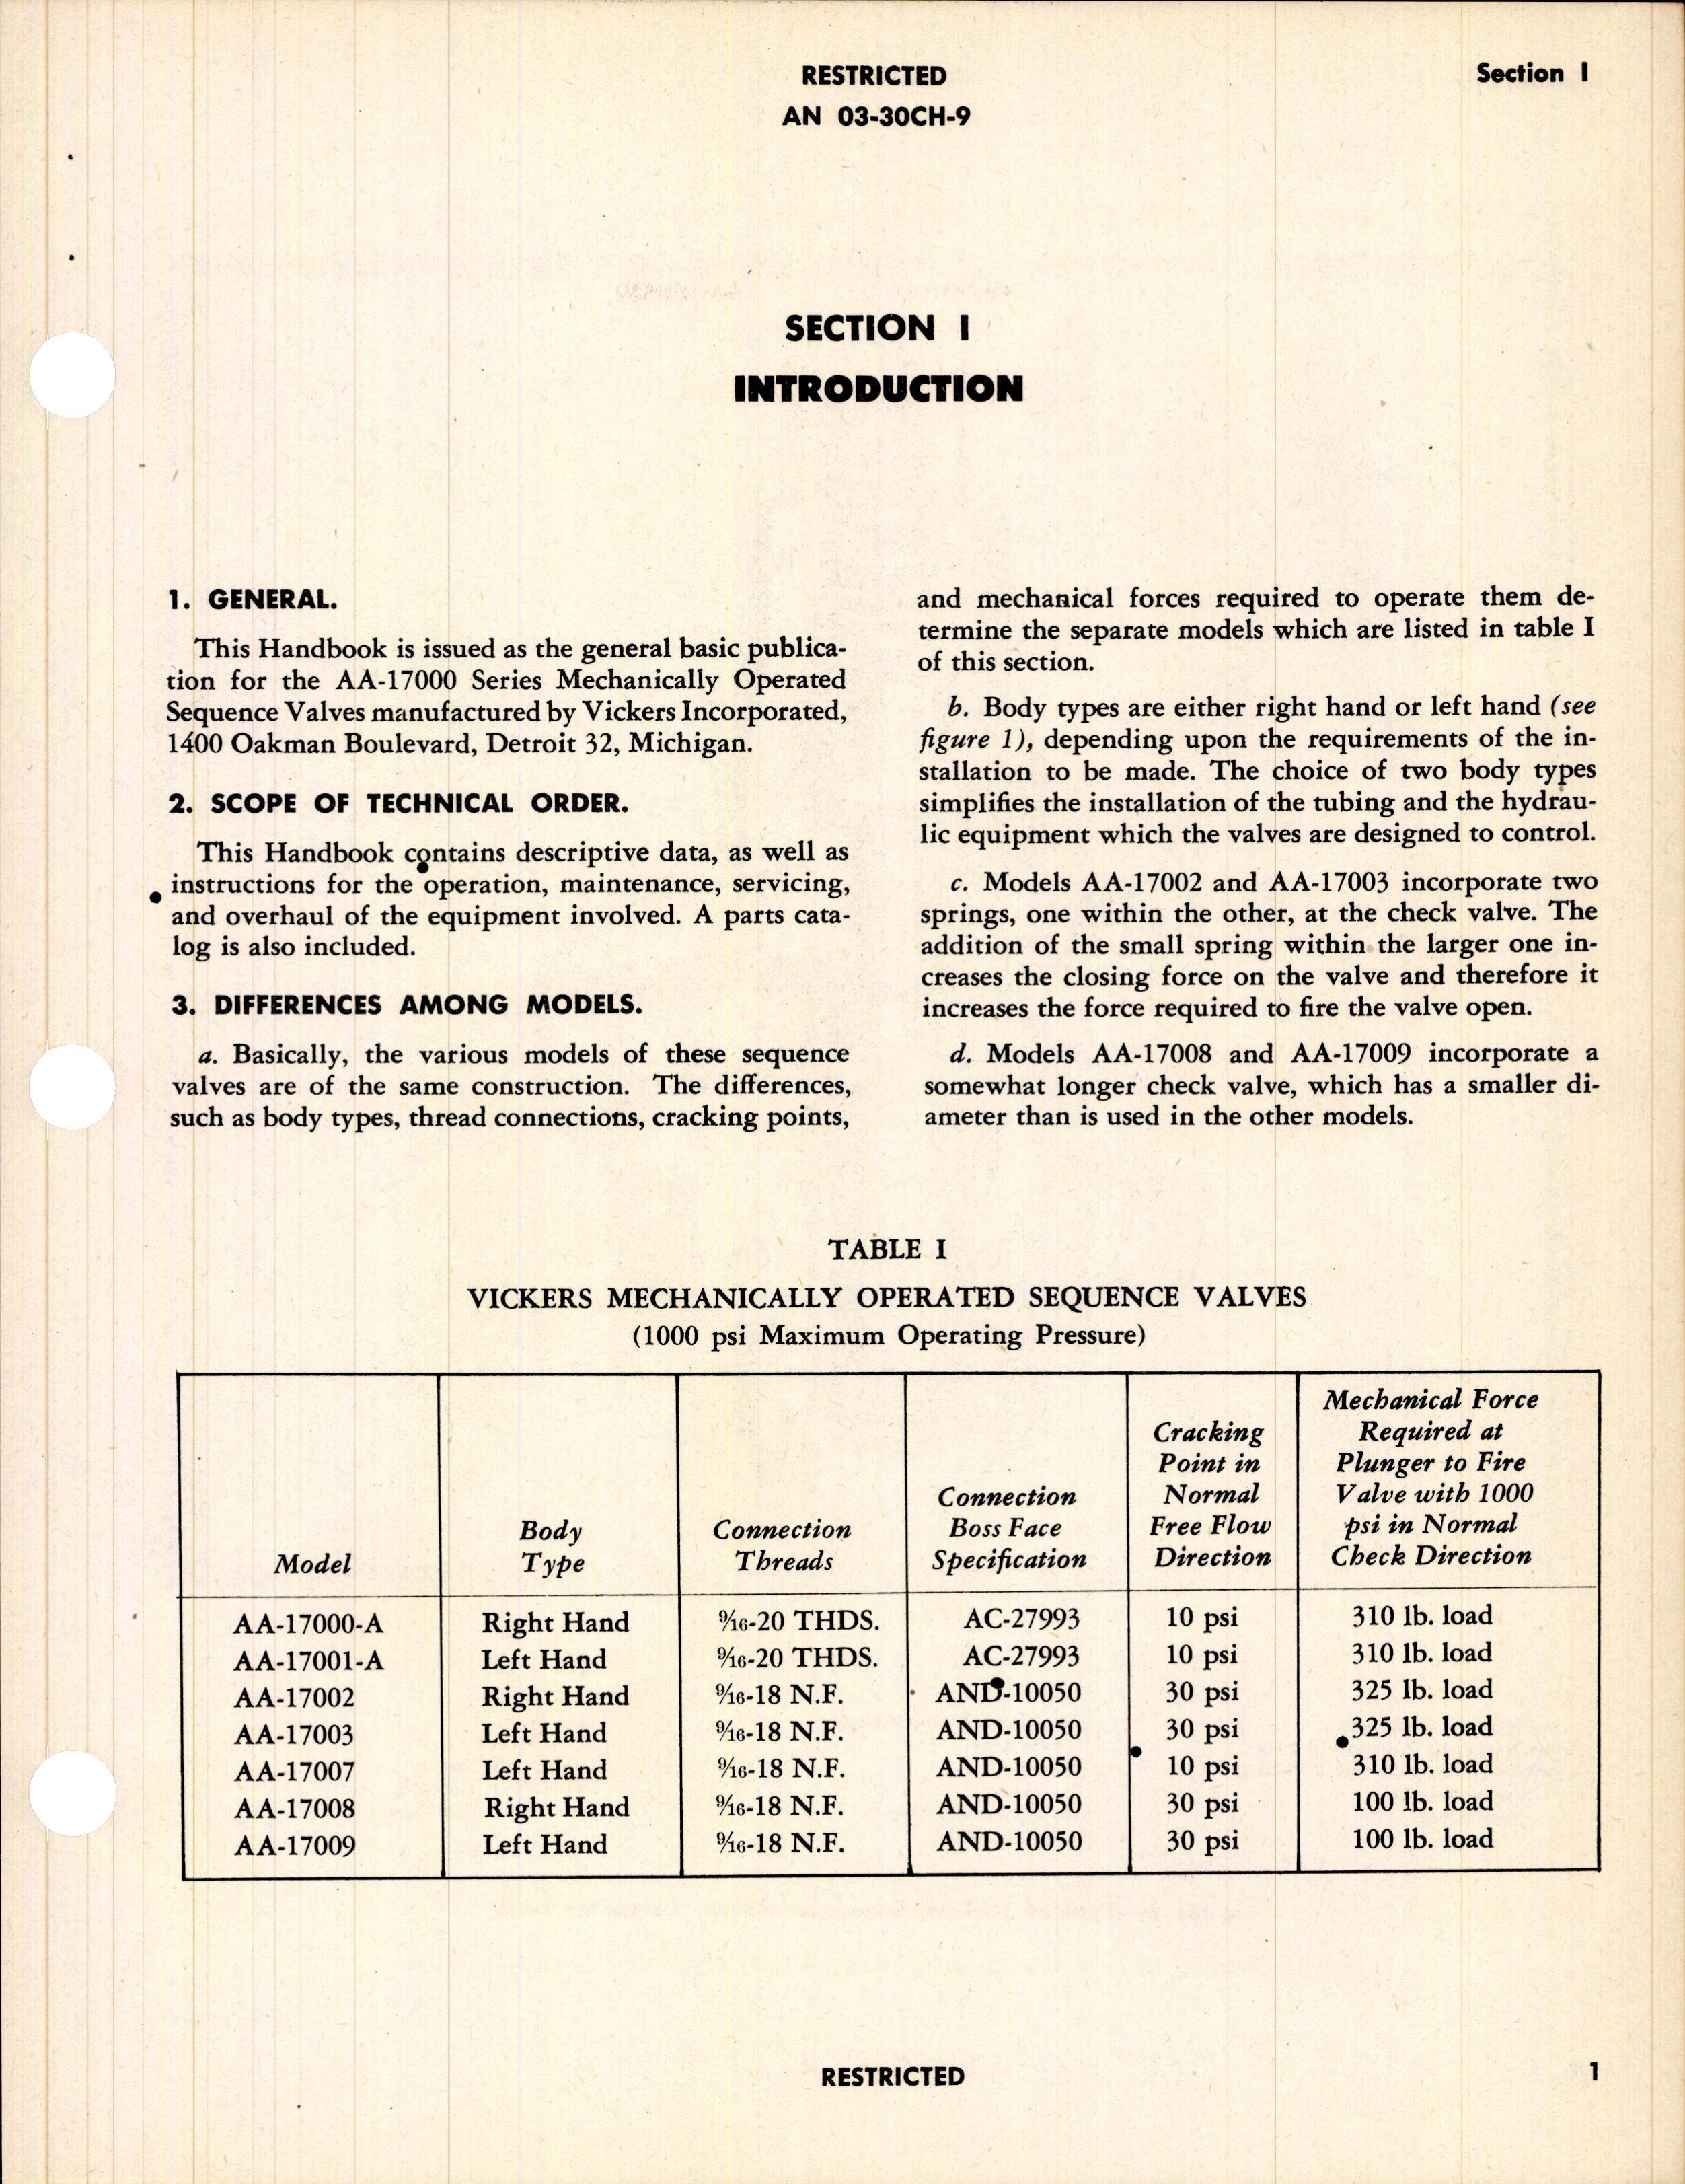 Sample page 5 from AirCorps Library document: Handbook of Instructions with Parts Catalog for Mechanically Operated Sequence Valves